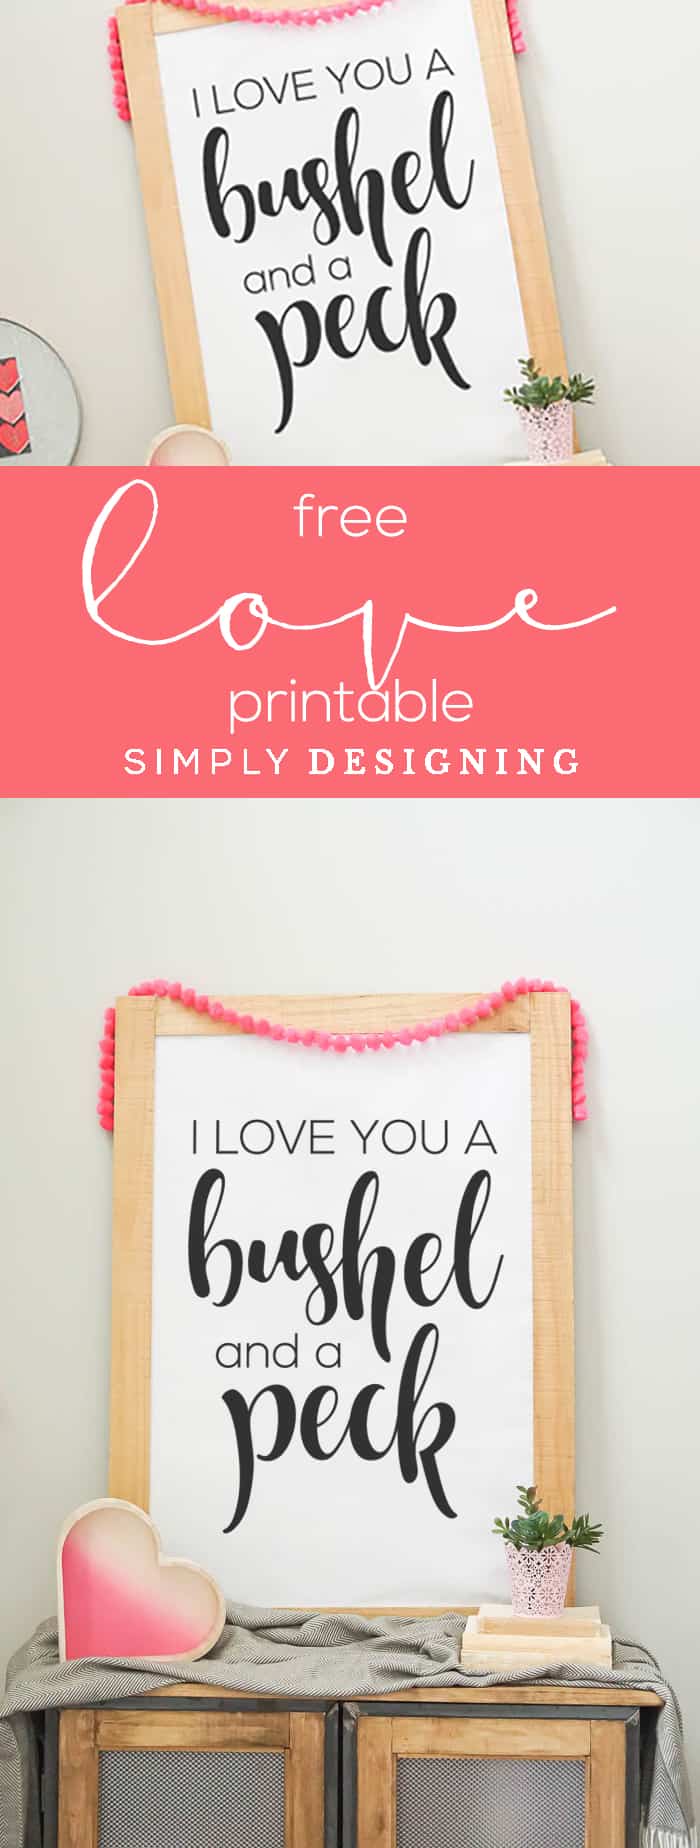 Free Valentines Day Print - Free Master Bedroom Print - Free Love Print - I Love You Printable - I love you a bushel and a peck - Simply Designing